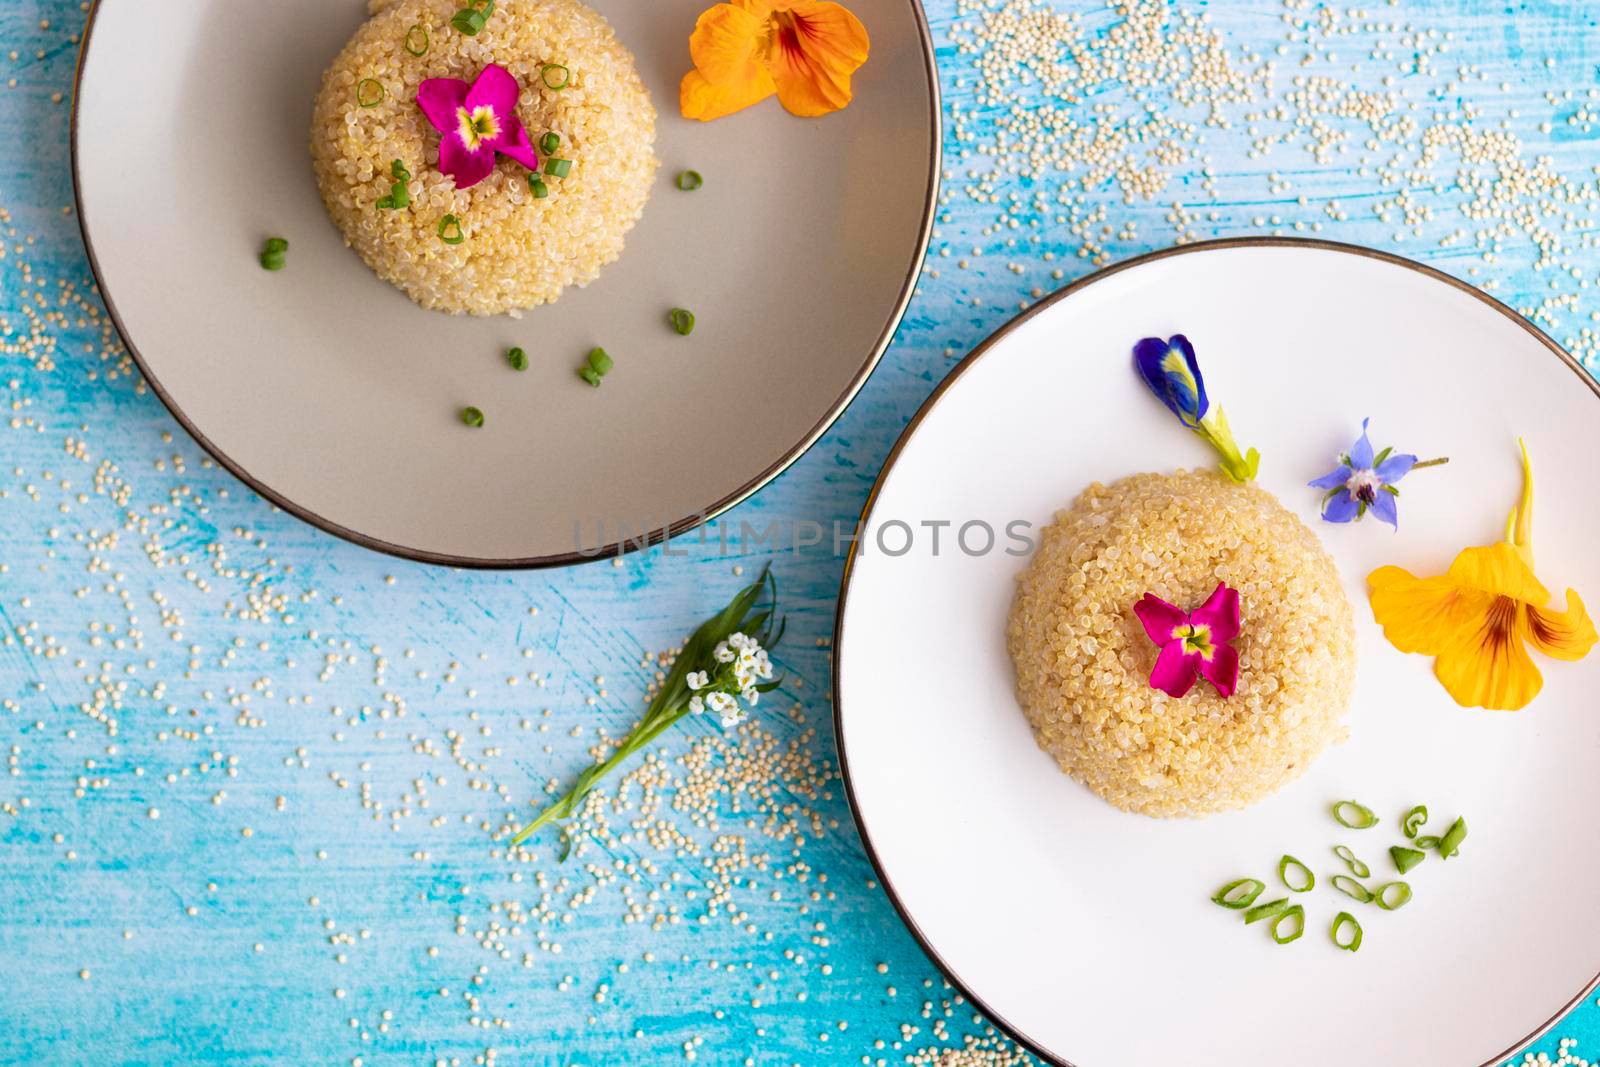 Quinoa plate presentation decorated with edible flowers by eagg13